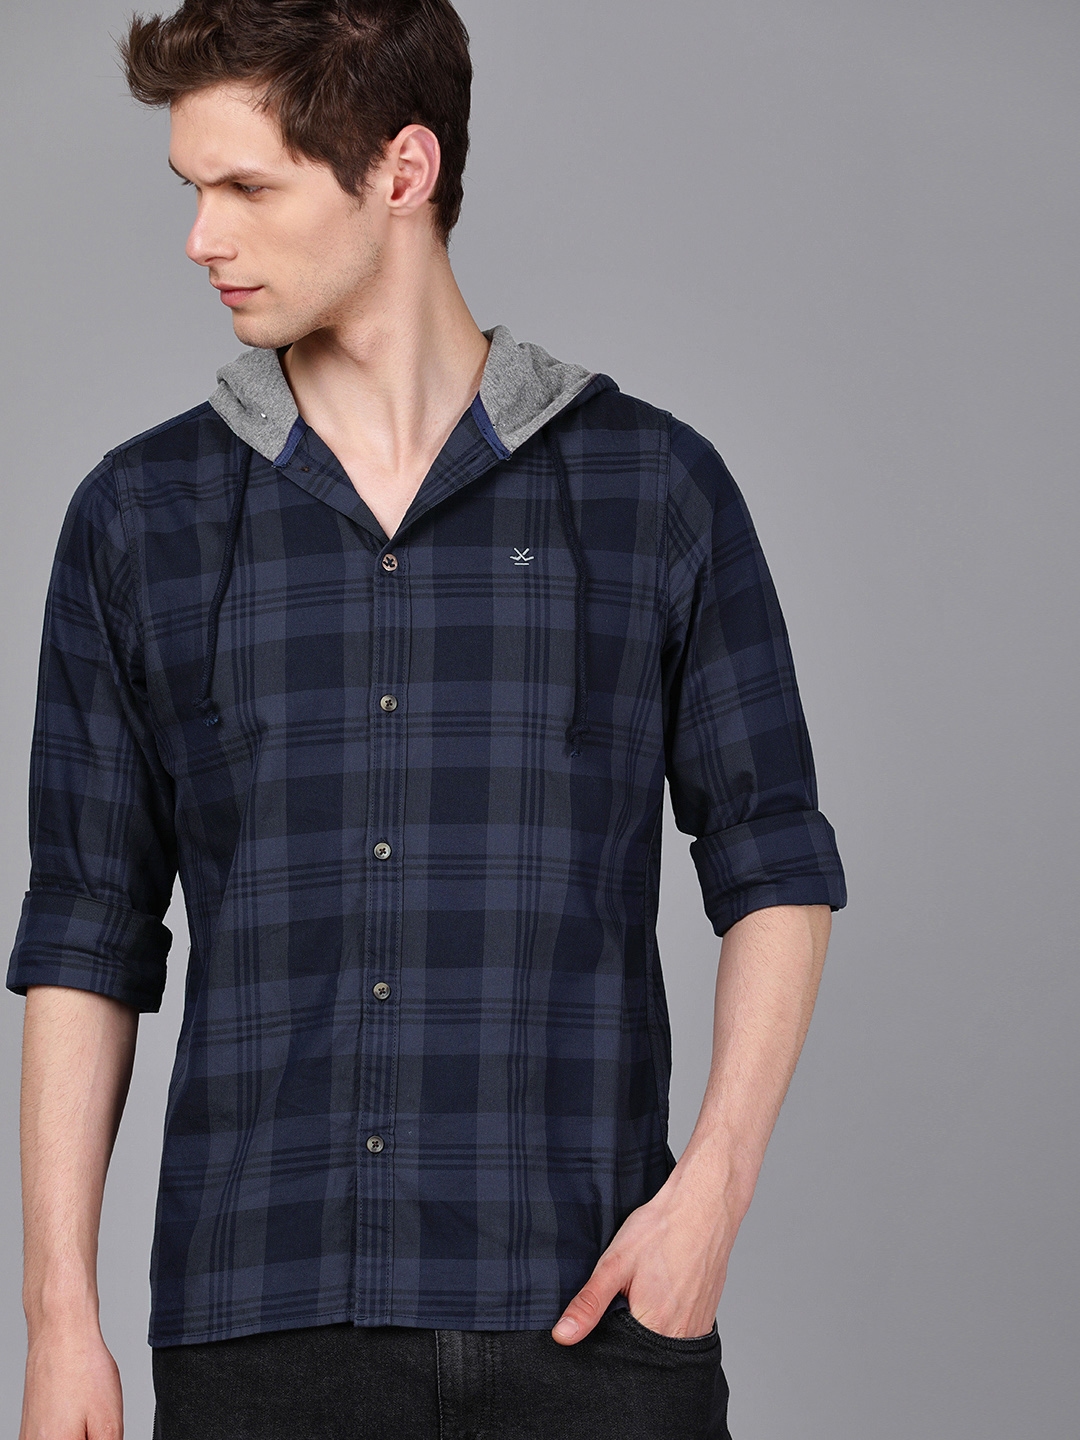 WROGN Men Navy Blue Checked Casual Hooded Shirt